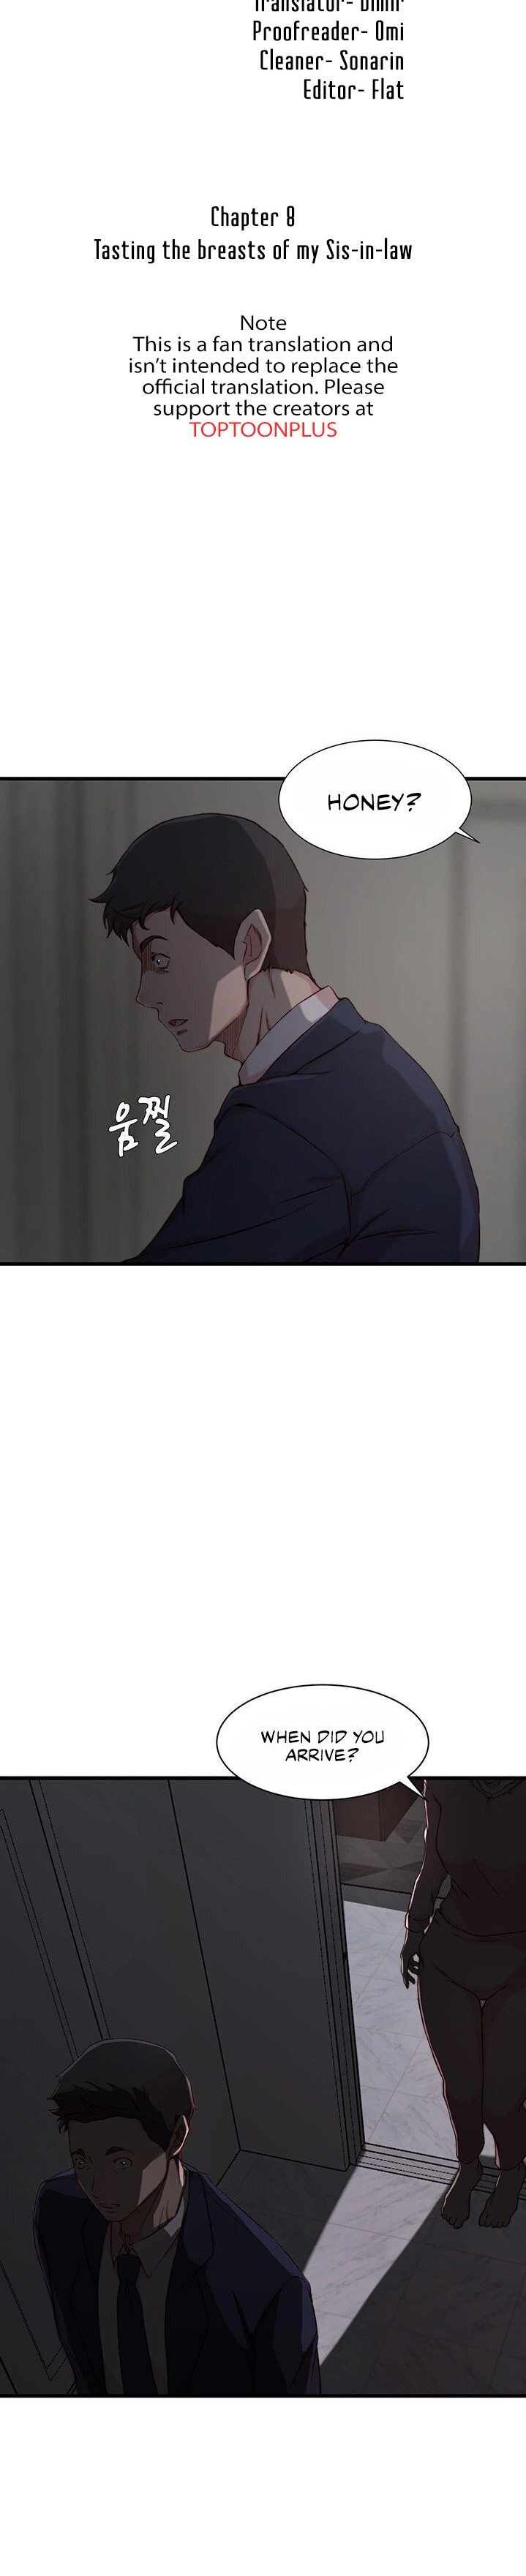 Sister-in-Law Manhwa - Chapter 8 Page 2